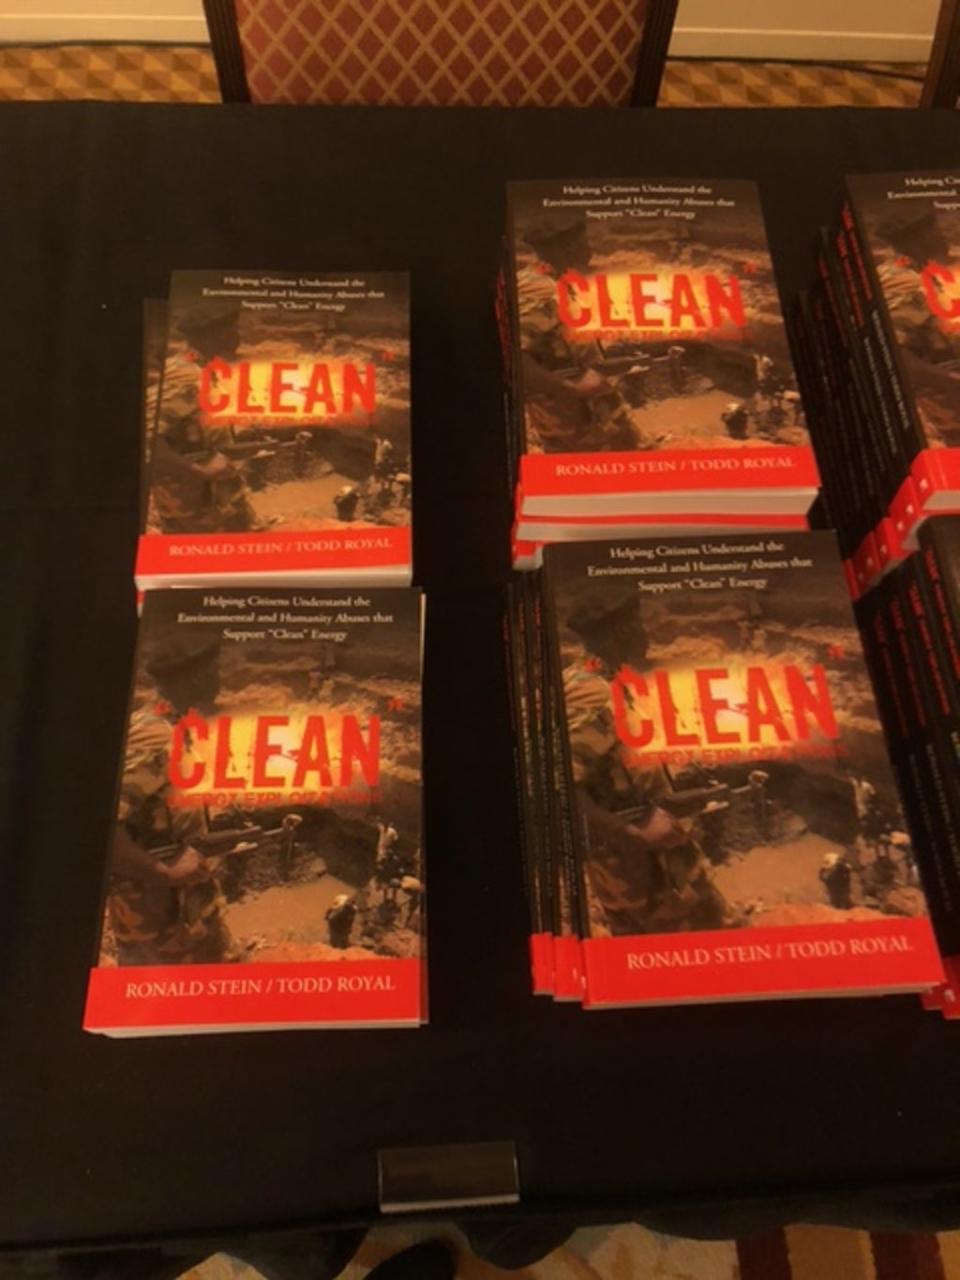 Books, pamphlets and other literature at the Heartland Institute’s October climate-change conference in Las Vegas sought to deconstruct mainstream arguments and established research (Sheila Flynn)